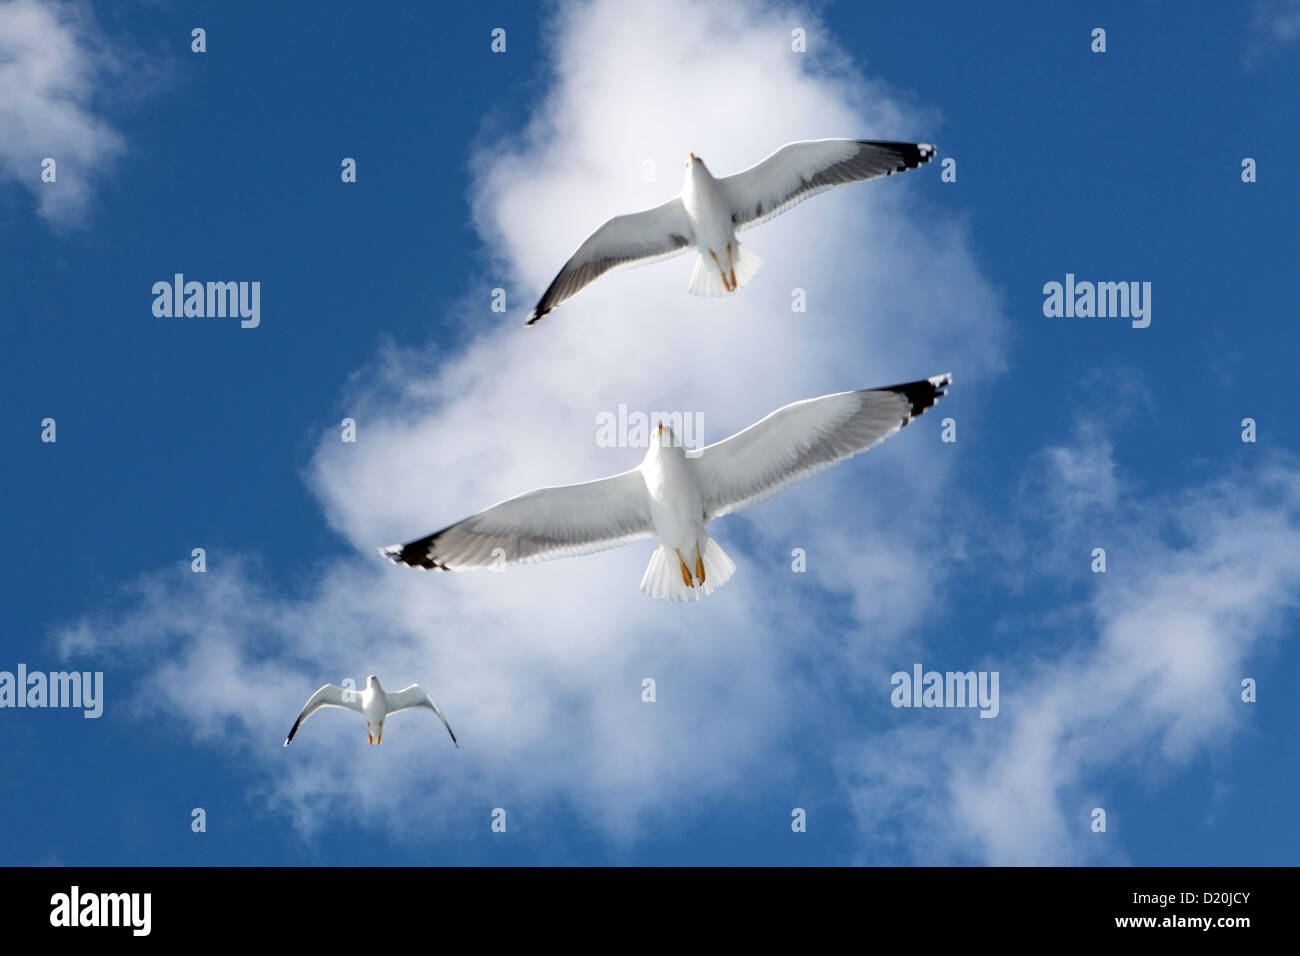 Looking up at three seagulls in flight against a bright blue sky & fluffy cloud, Tenerife, Canary Islands Stock Photo